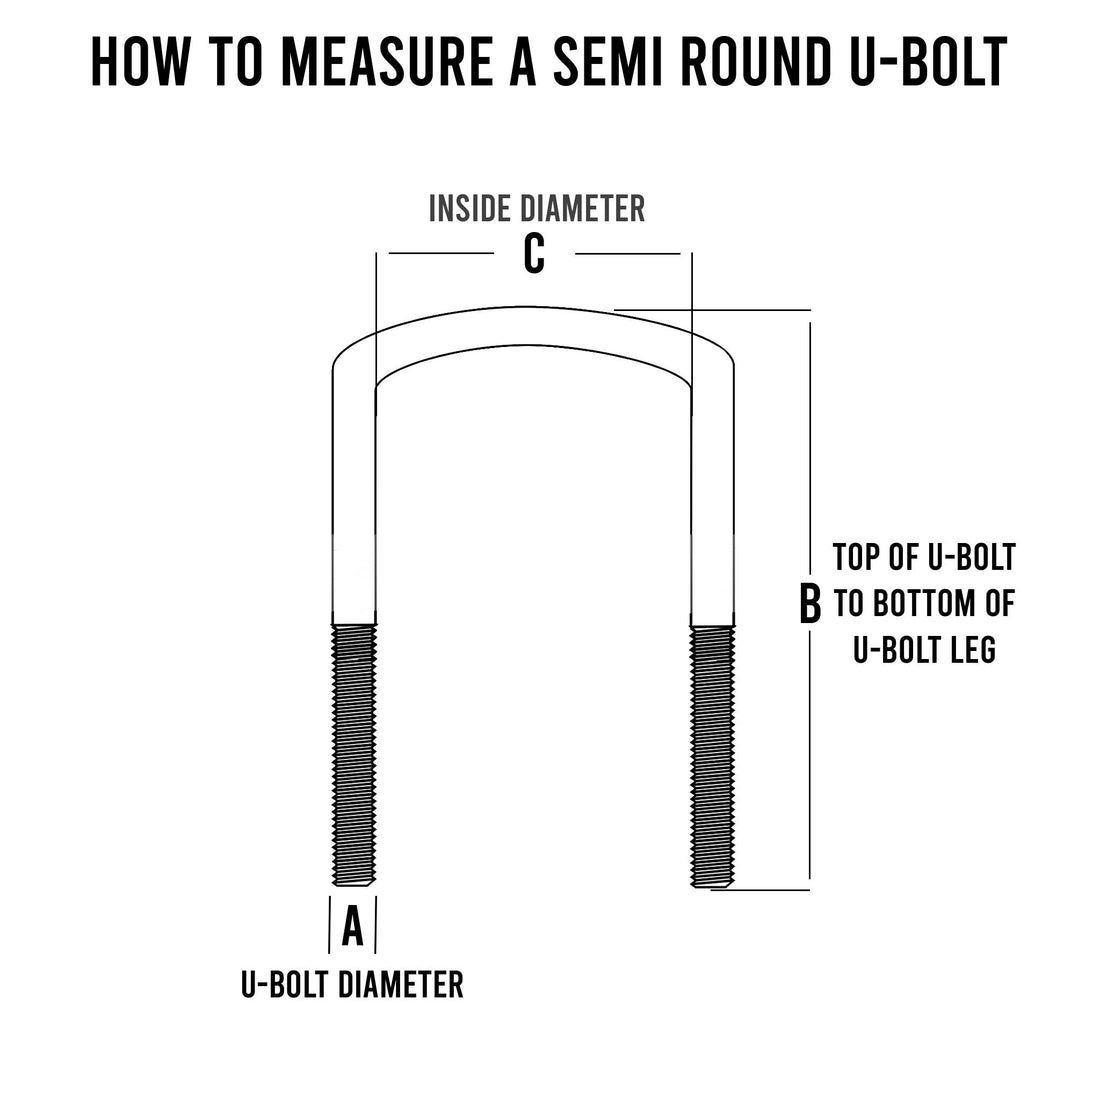 Diagram of how to measure a 9/16 inch semi round U-bolt.